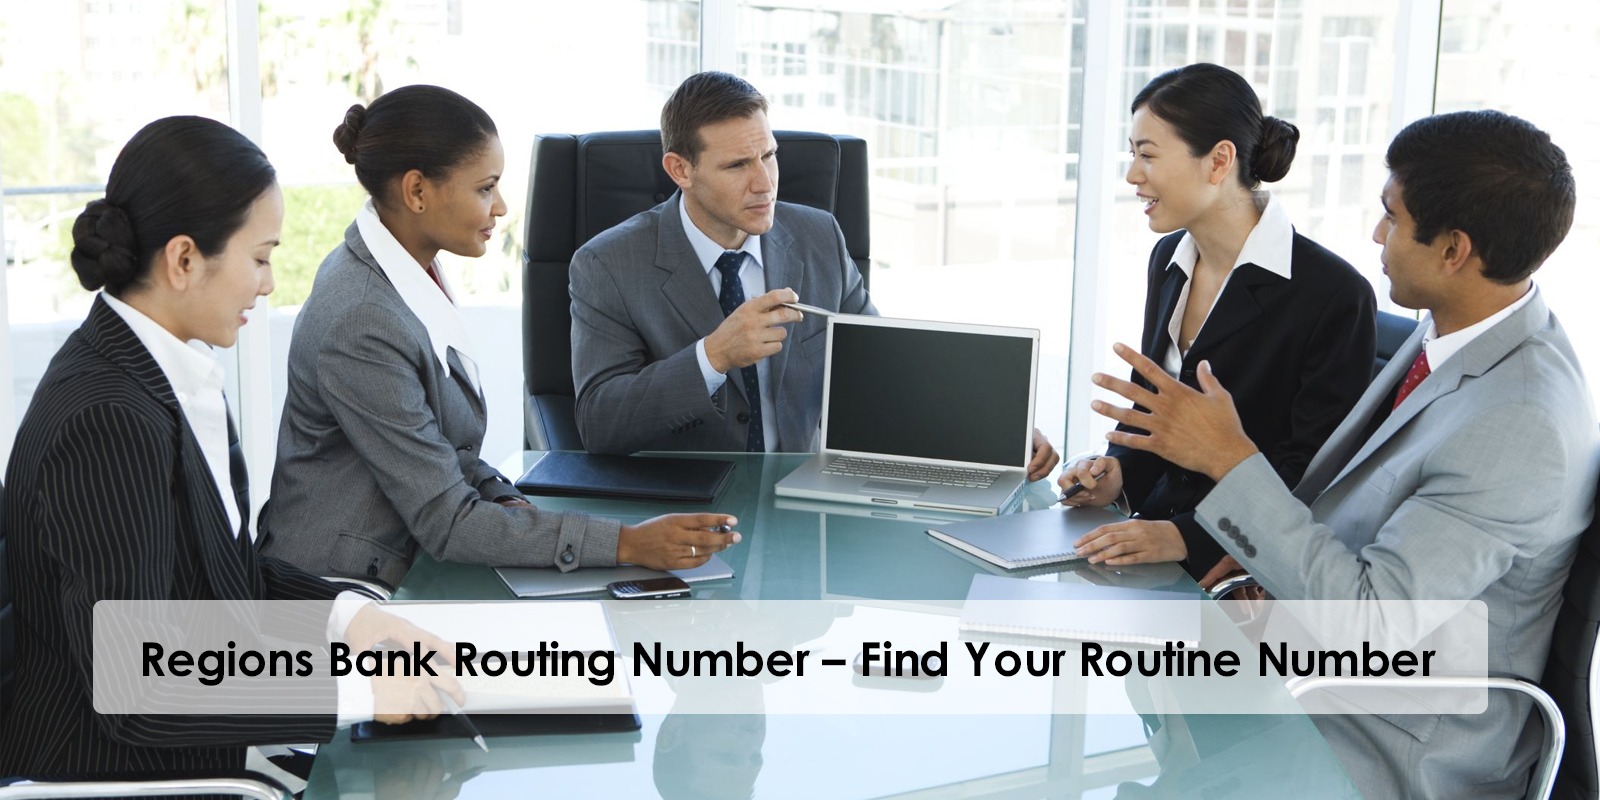 Regions Bank Routing Number – Find Your Routine Number